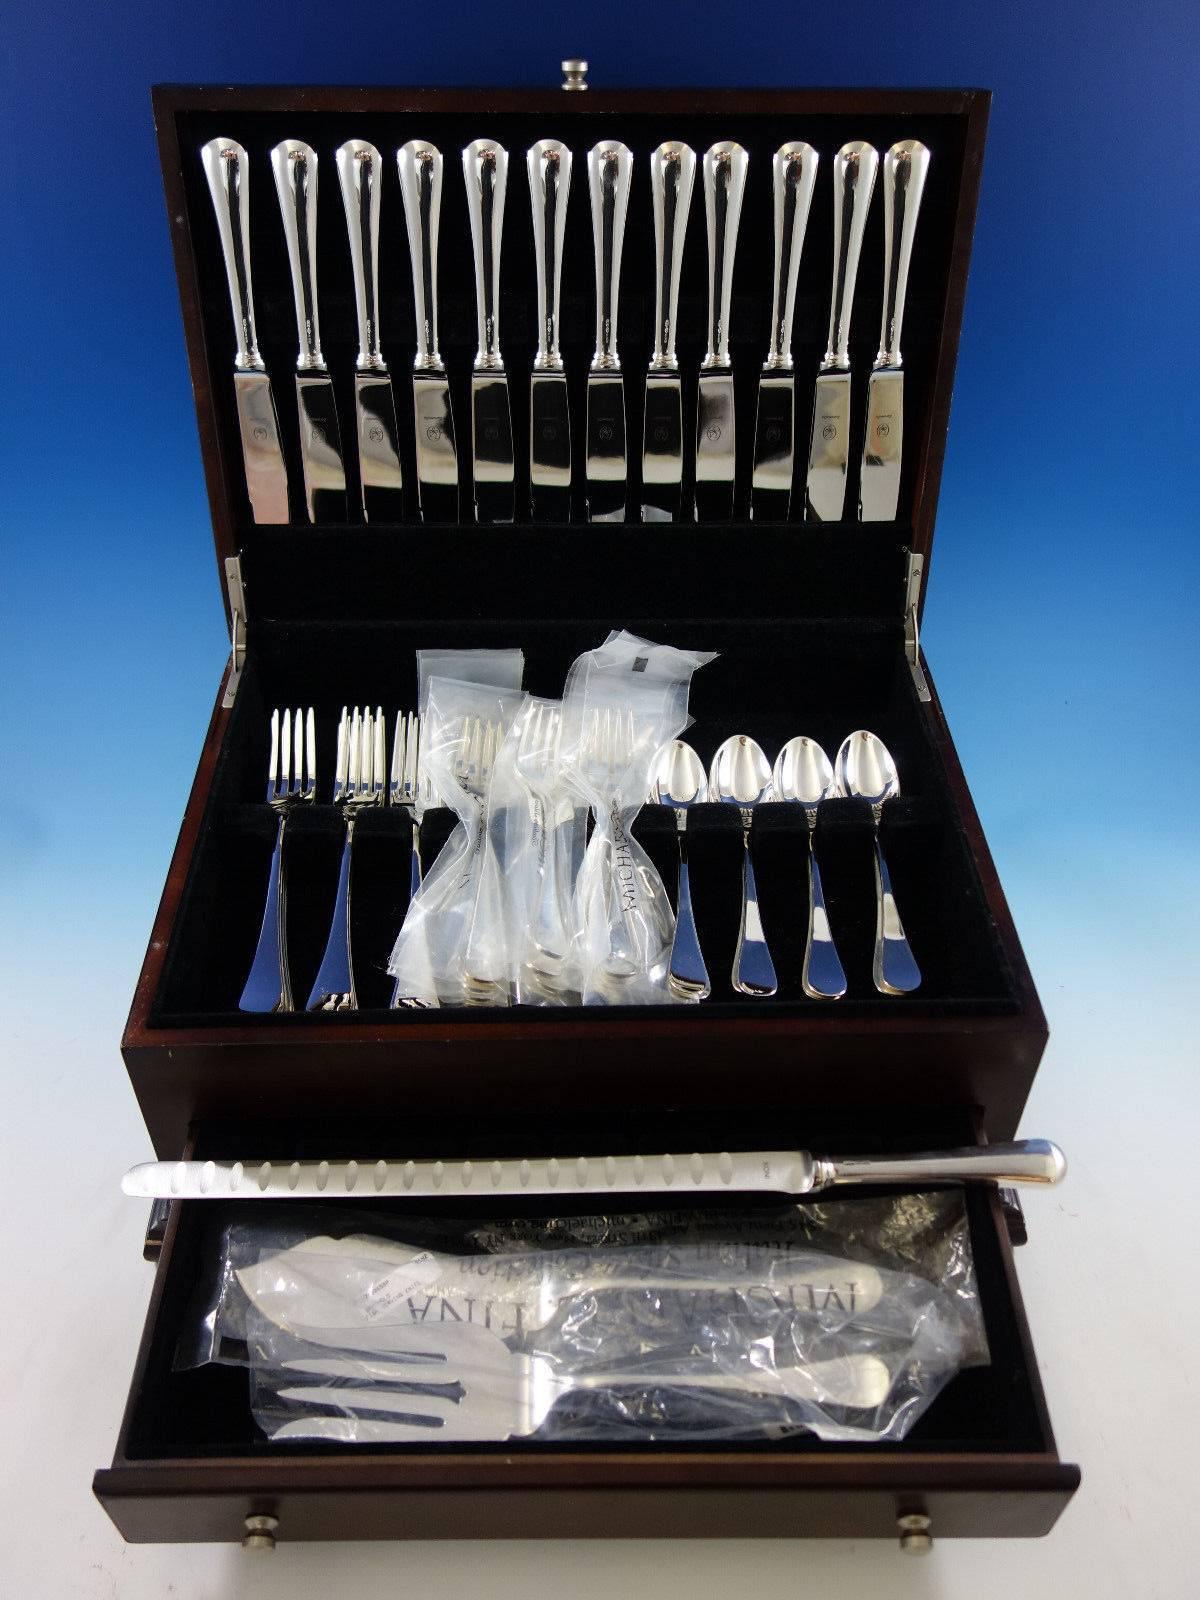 Spagnolo by Zarmella Argenti, retailed by Michael C Fina, Italian sterling silver flatware set of 51 pieces. This set is in pristine, unused condition. Note: The teaspoons are Tiffany & Co. King William pattern. This set includes: 

12 dinner size